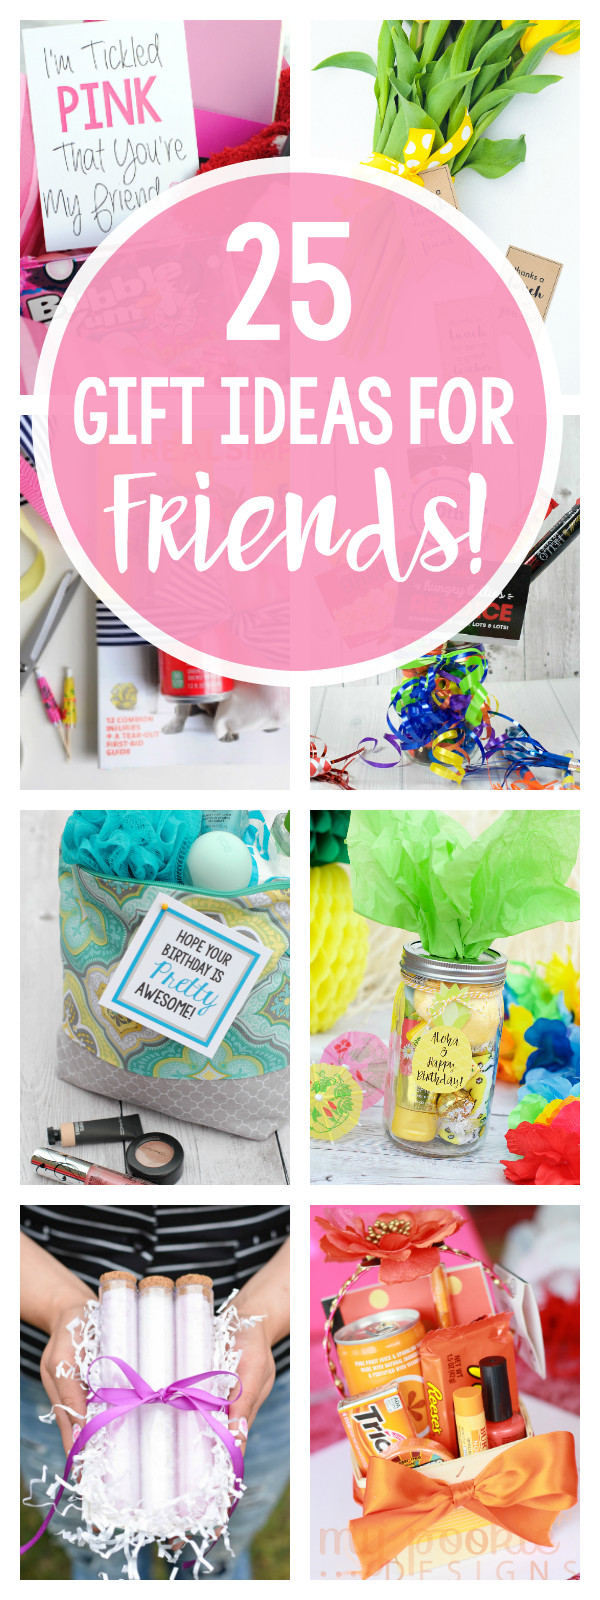 Friend Birthday Gift Ideas
 25 Fun Gifts for Best Friends for Any Occasion – Fun Squared